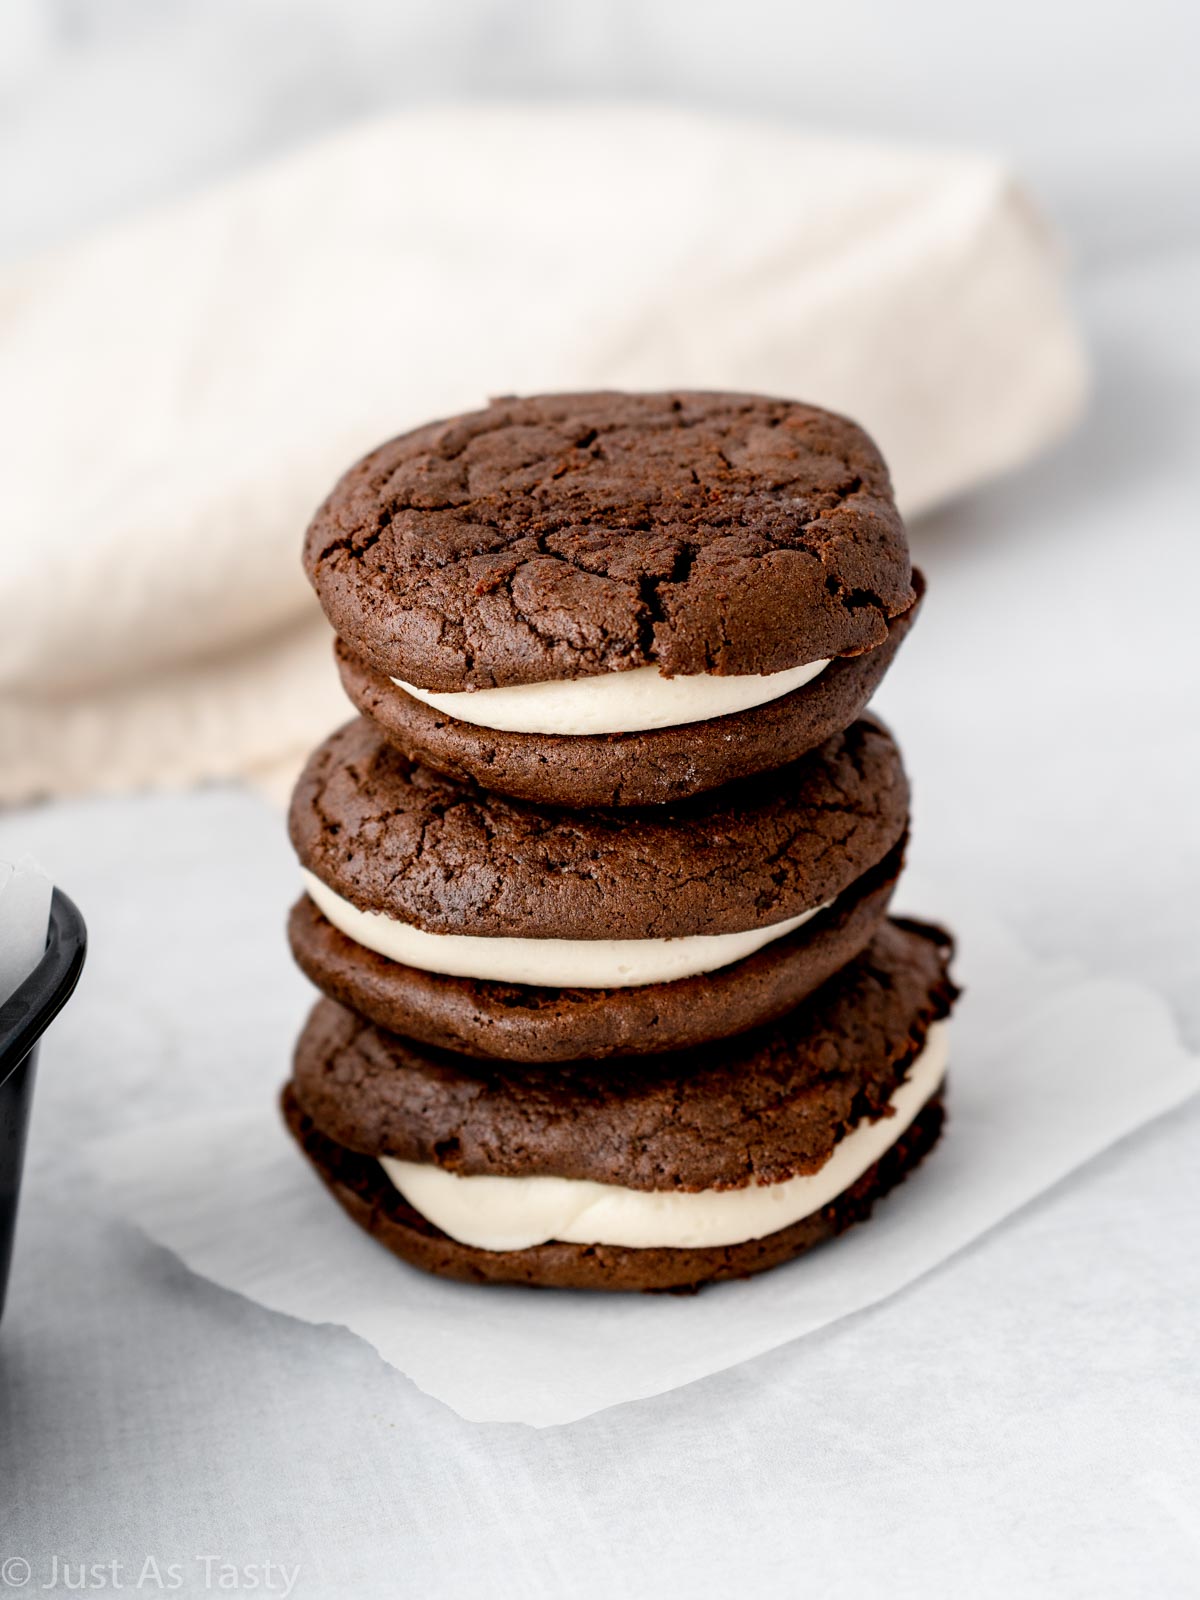 Stack of three chocolate whoopie pies.